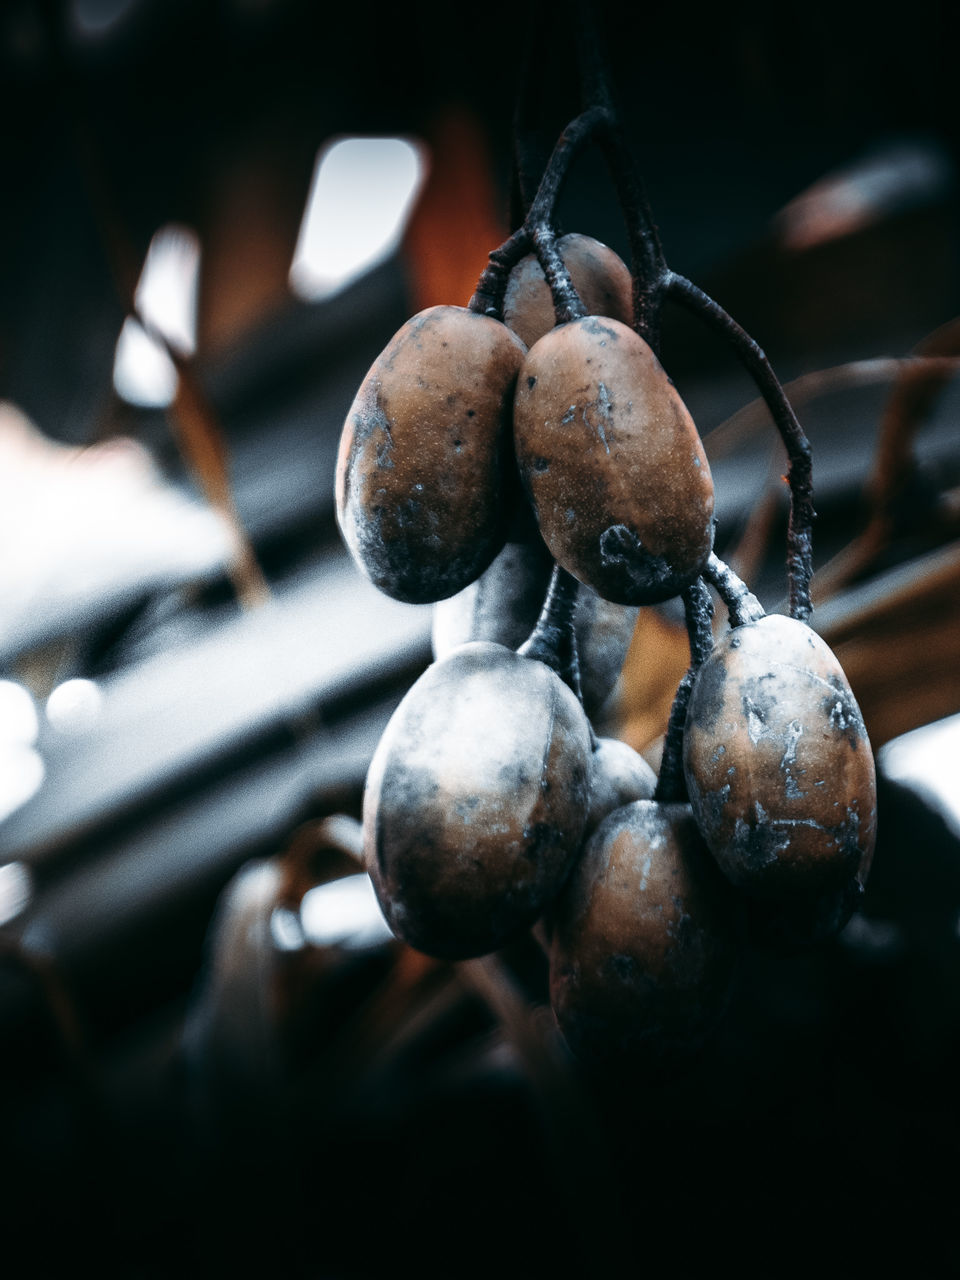 food and drink, food, healthy eating, fruit, close-up, wellbeing, no people, freshness, selective focus, focus on foreground, day, outdoors, berry fruit, still life, nature, metal, raw food, hanging, ripe